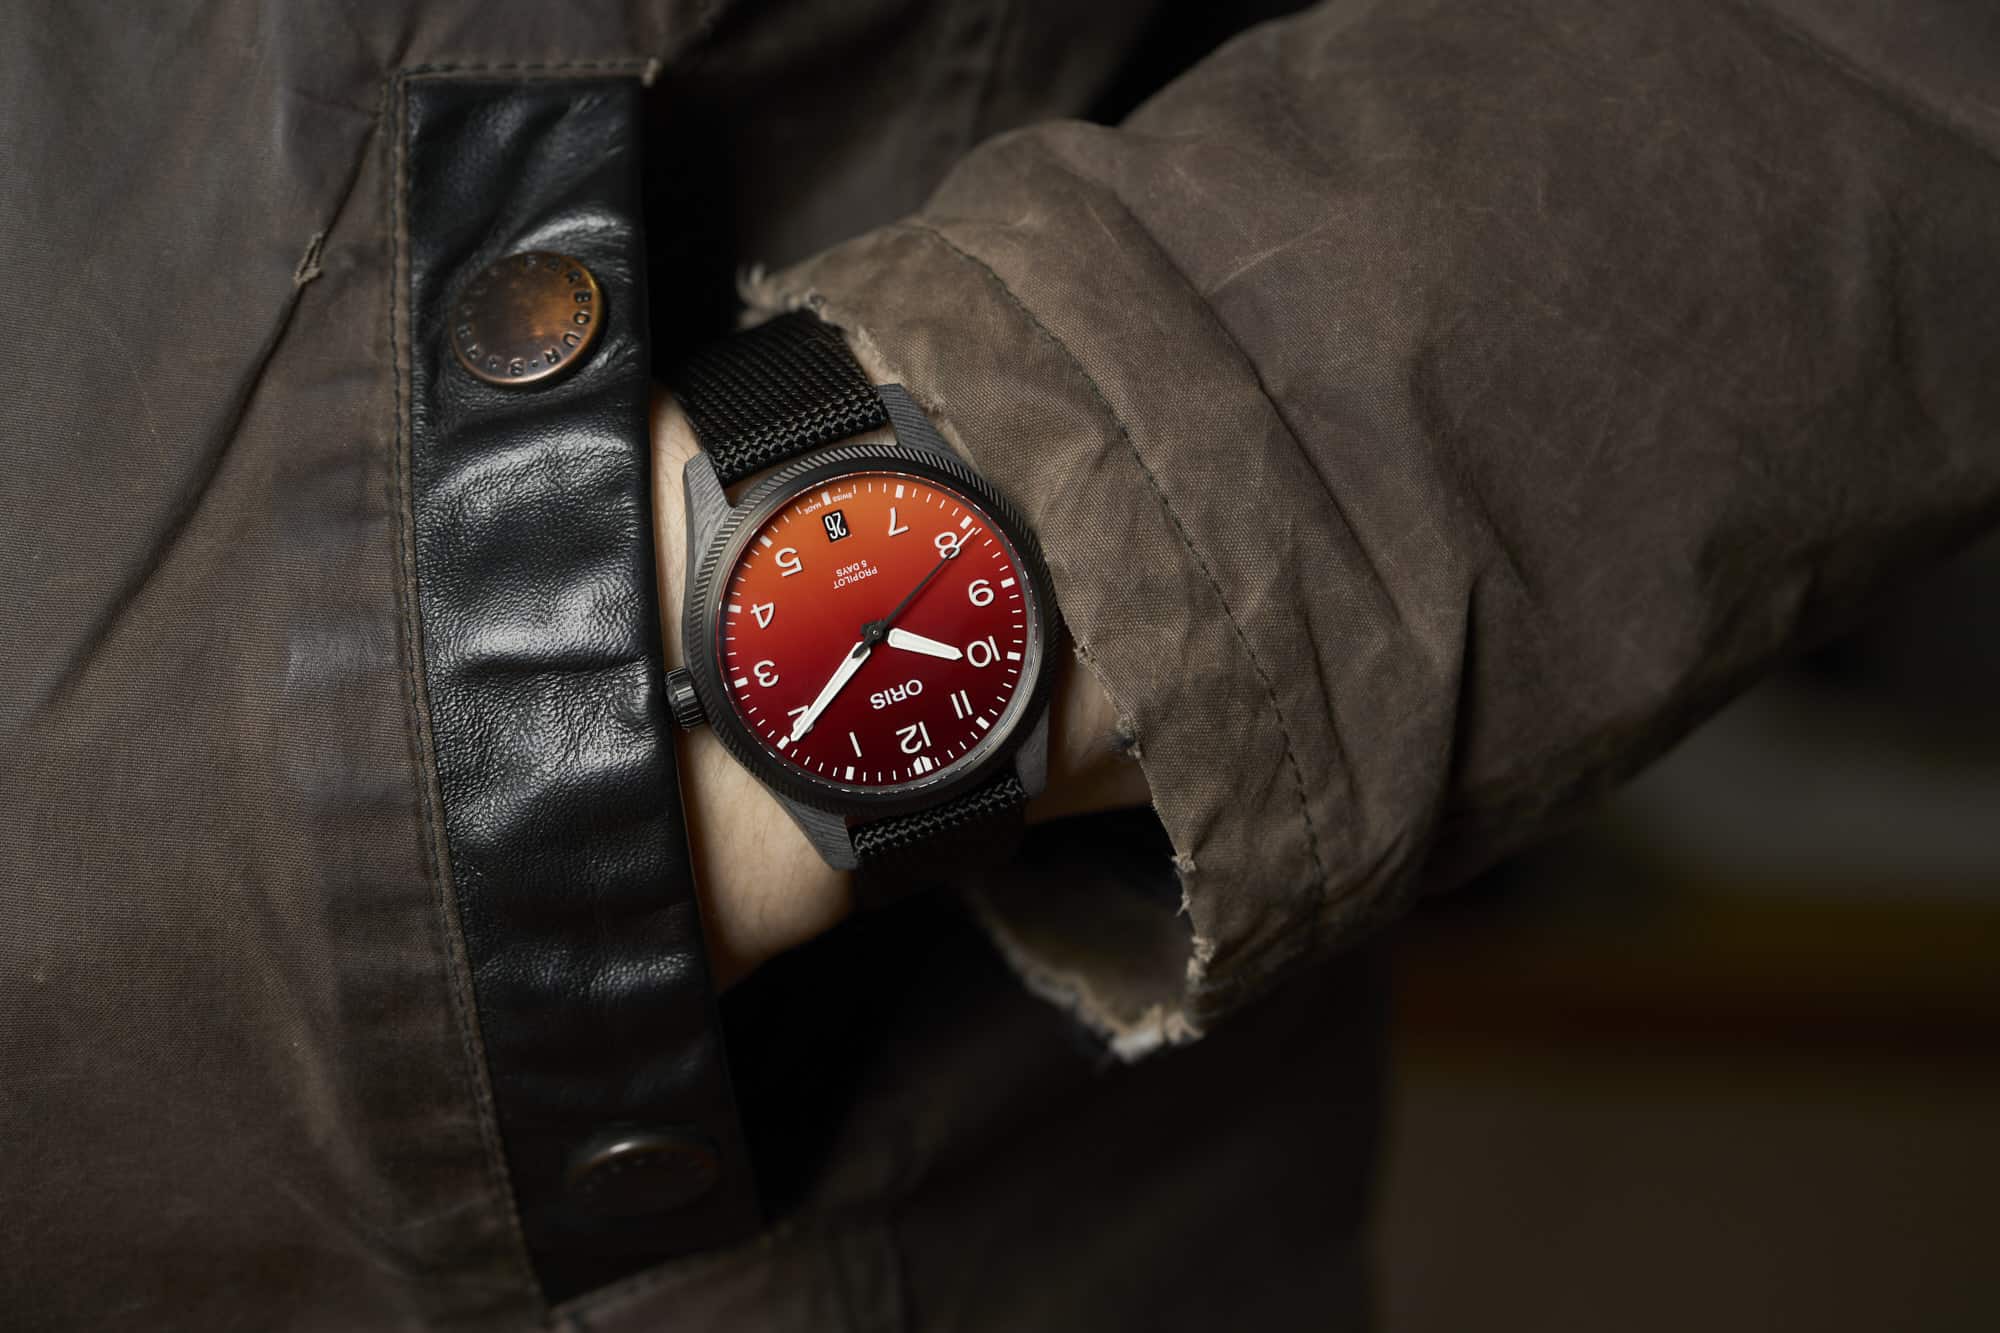 The Roundup: A Watch That Plays With Fire, A Strap That Goes With (Almost) Everything, And An Incredibly Handy Tool